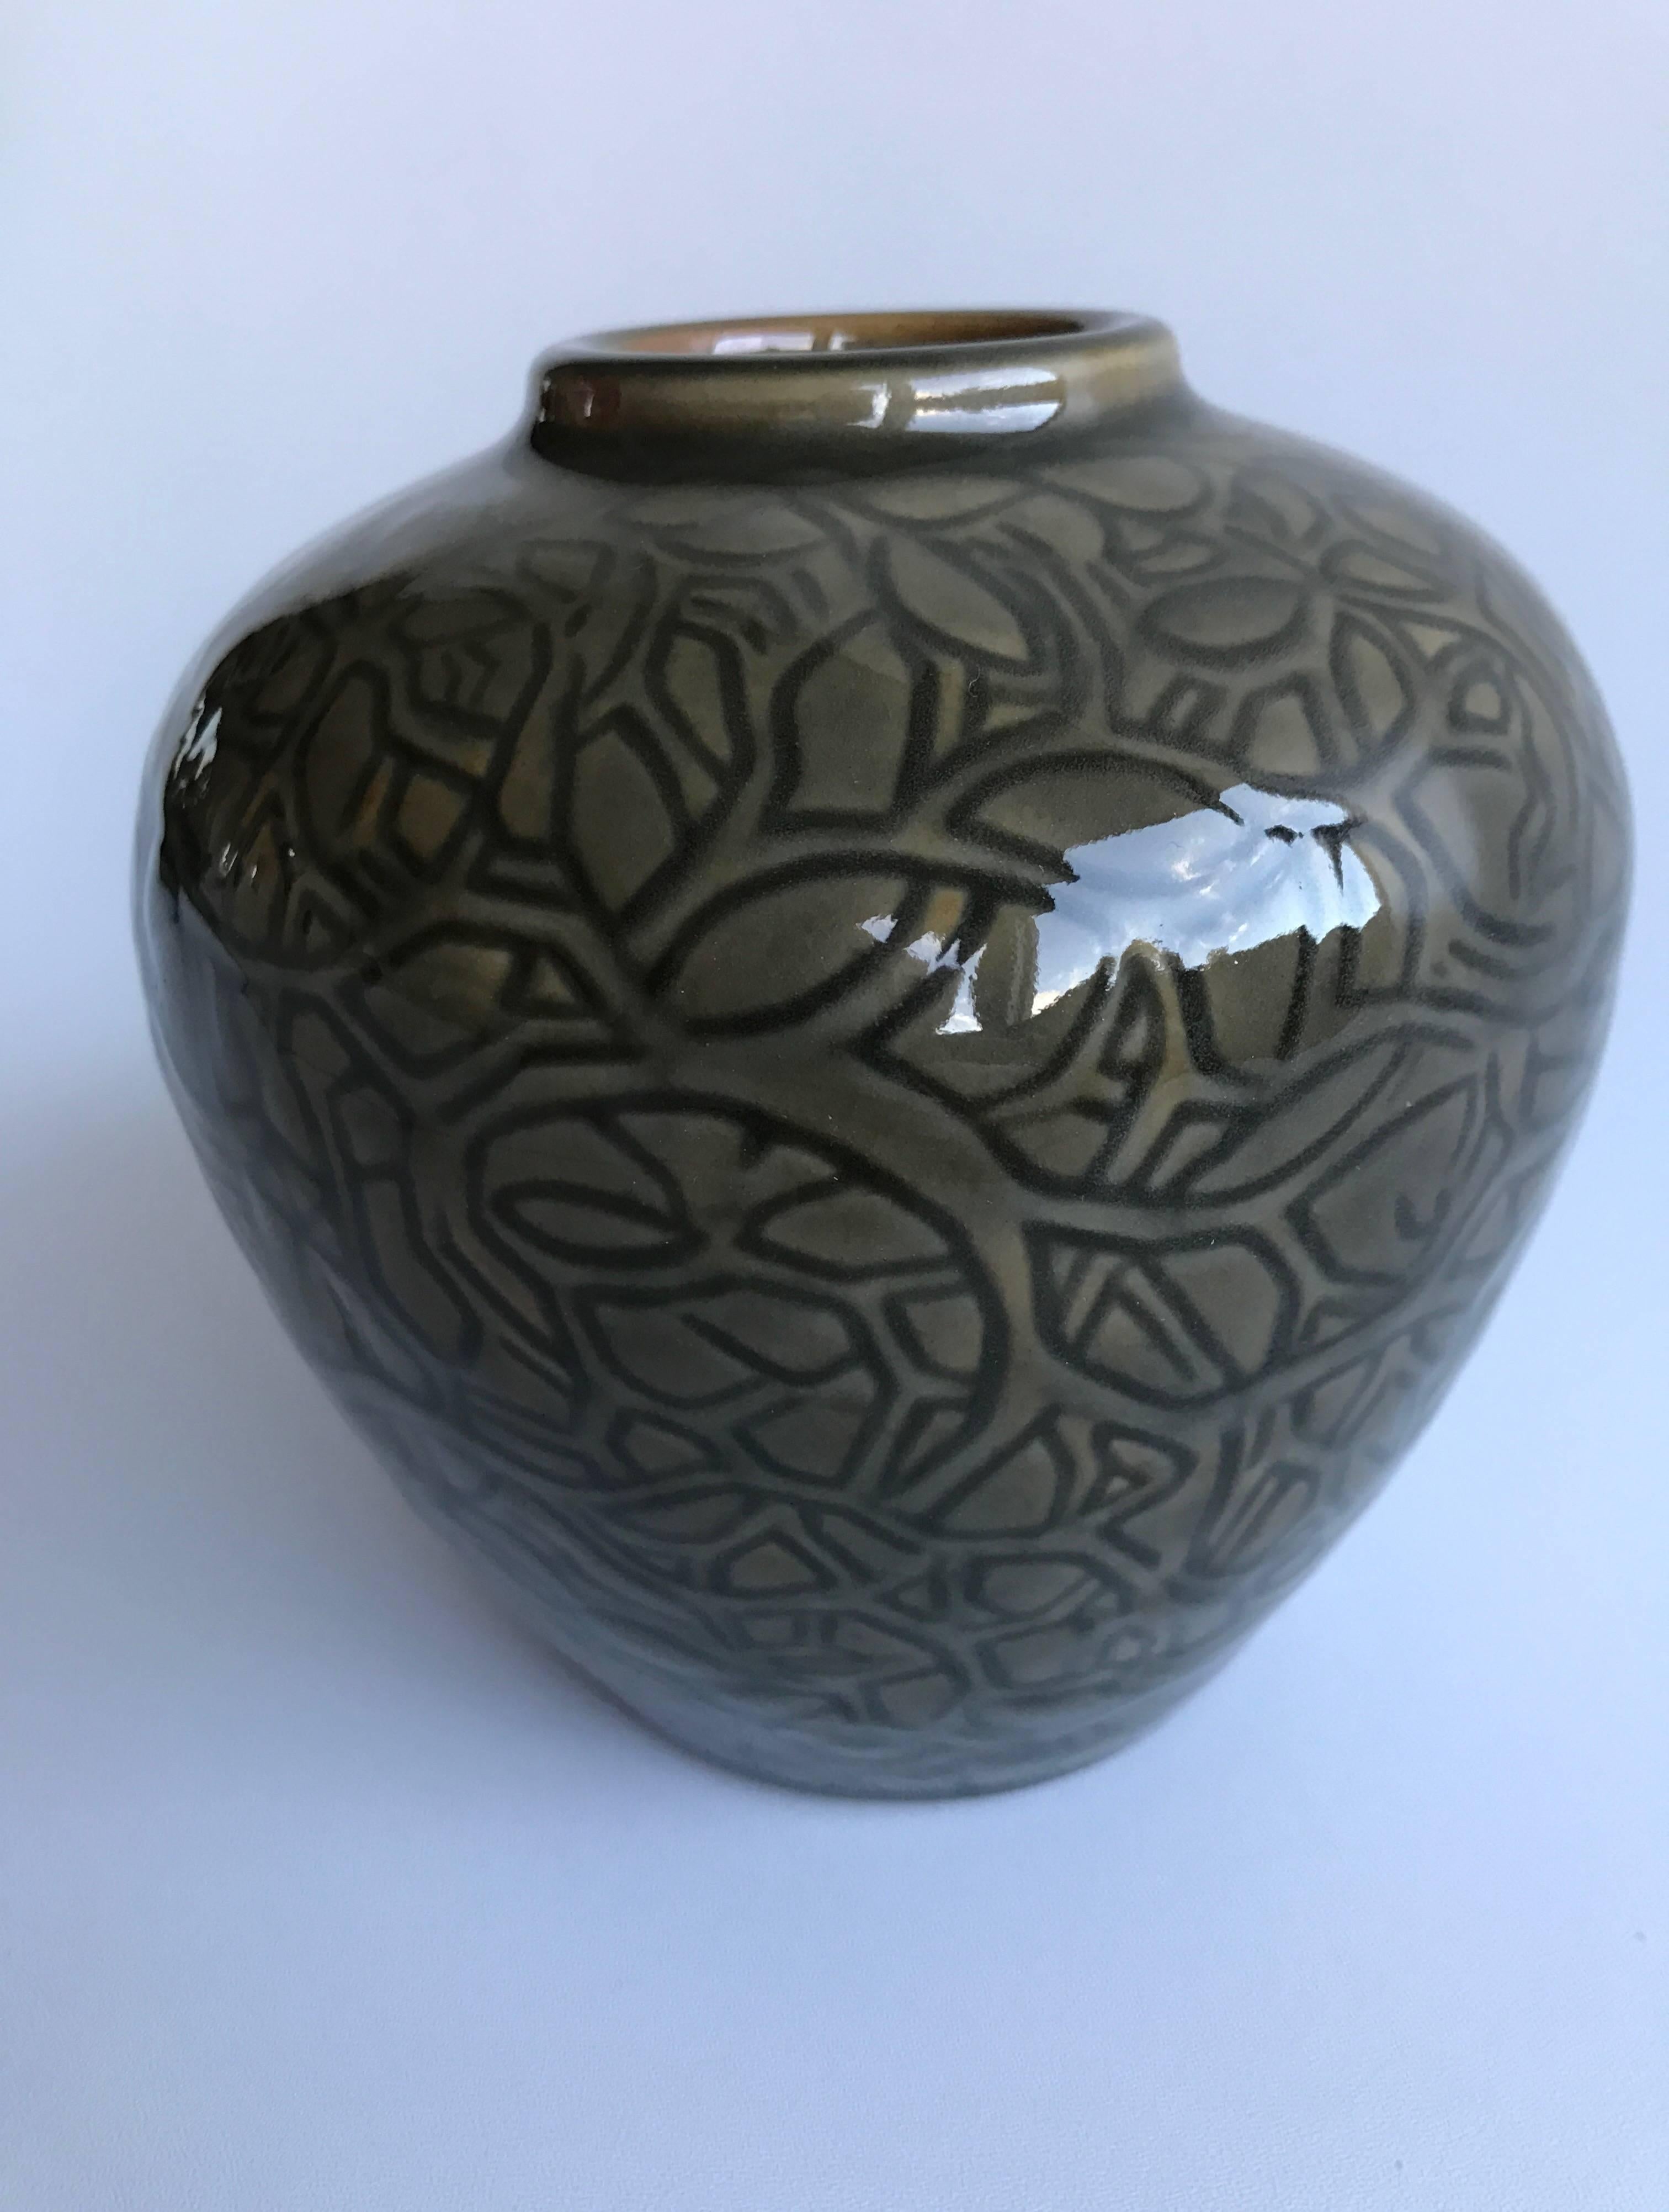 Beautiful Axel Salto vase in green and black glaze with the pattern of leafs and branches. Made for Royal Copenhagen in the 1930s. Similar vase is illustrated in the Danish book called "Keramik i lange baner" page 258, for the Danish art